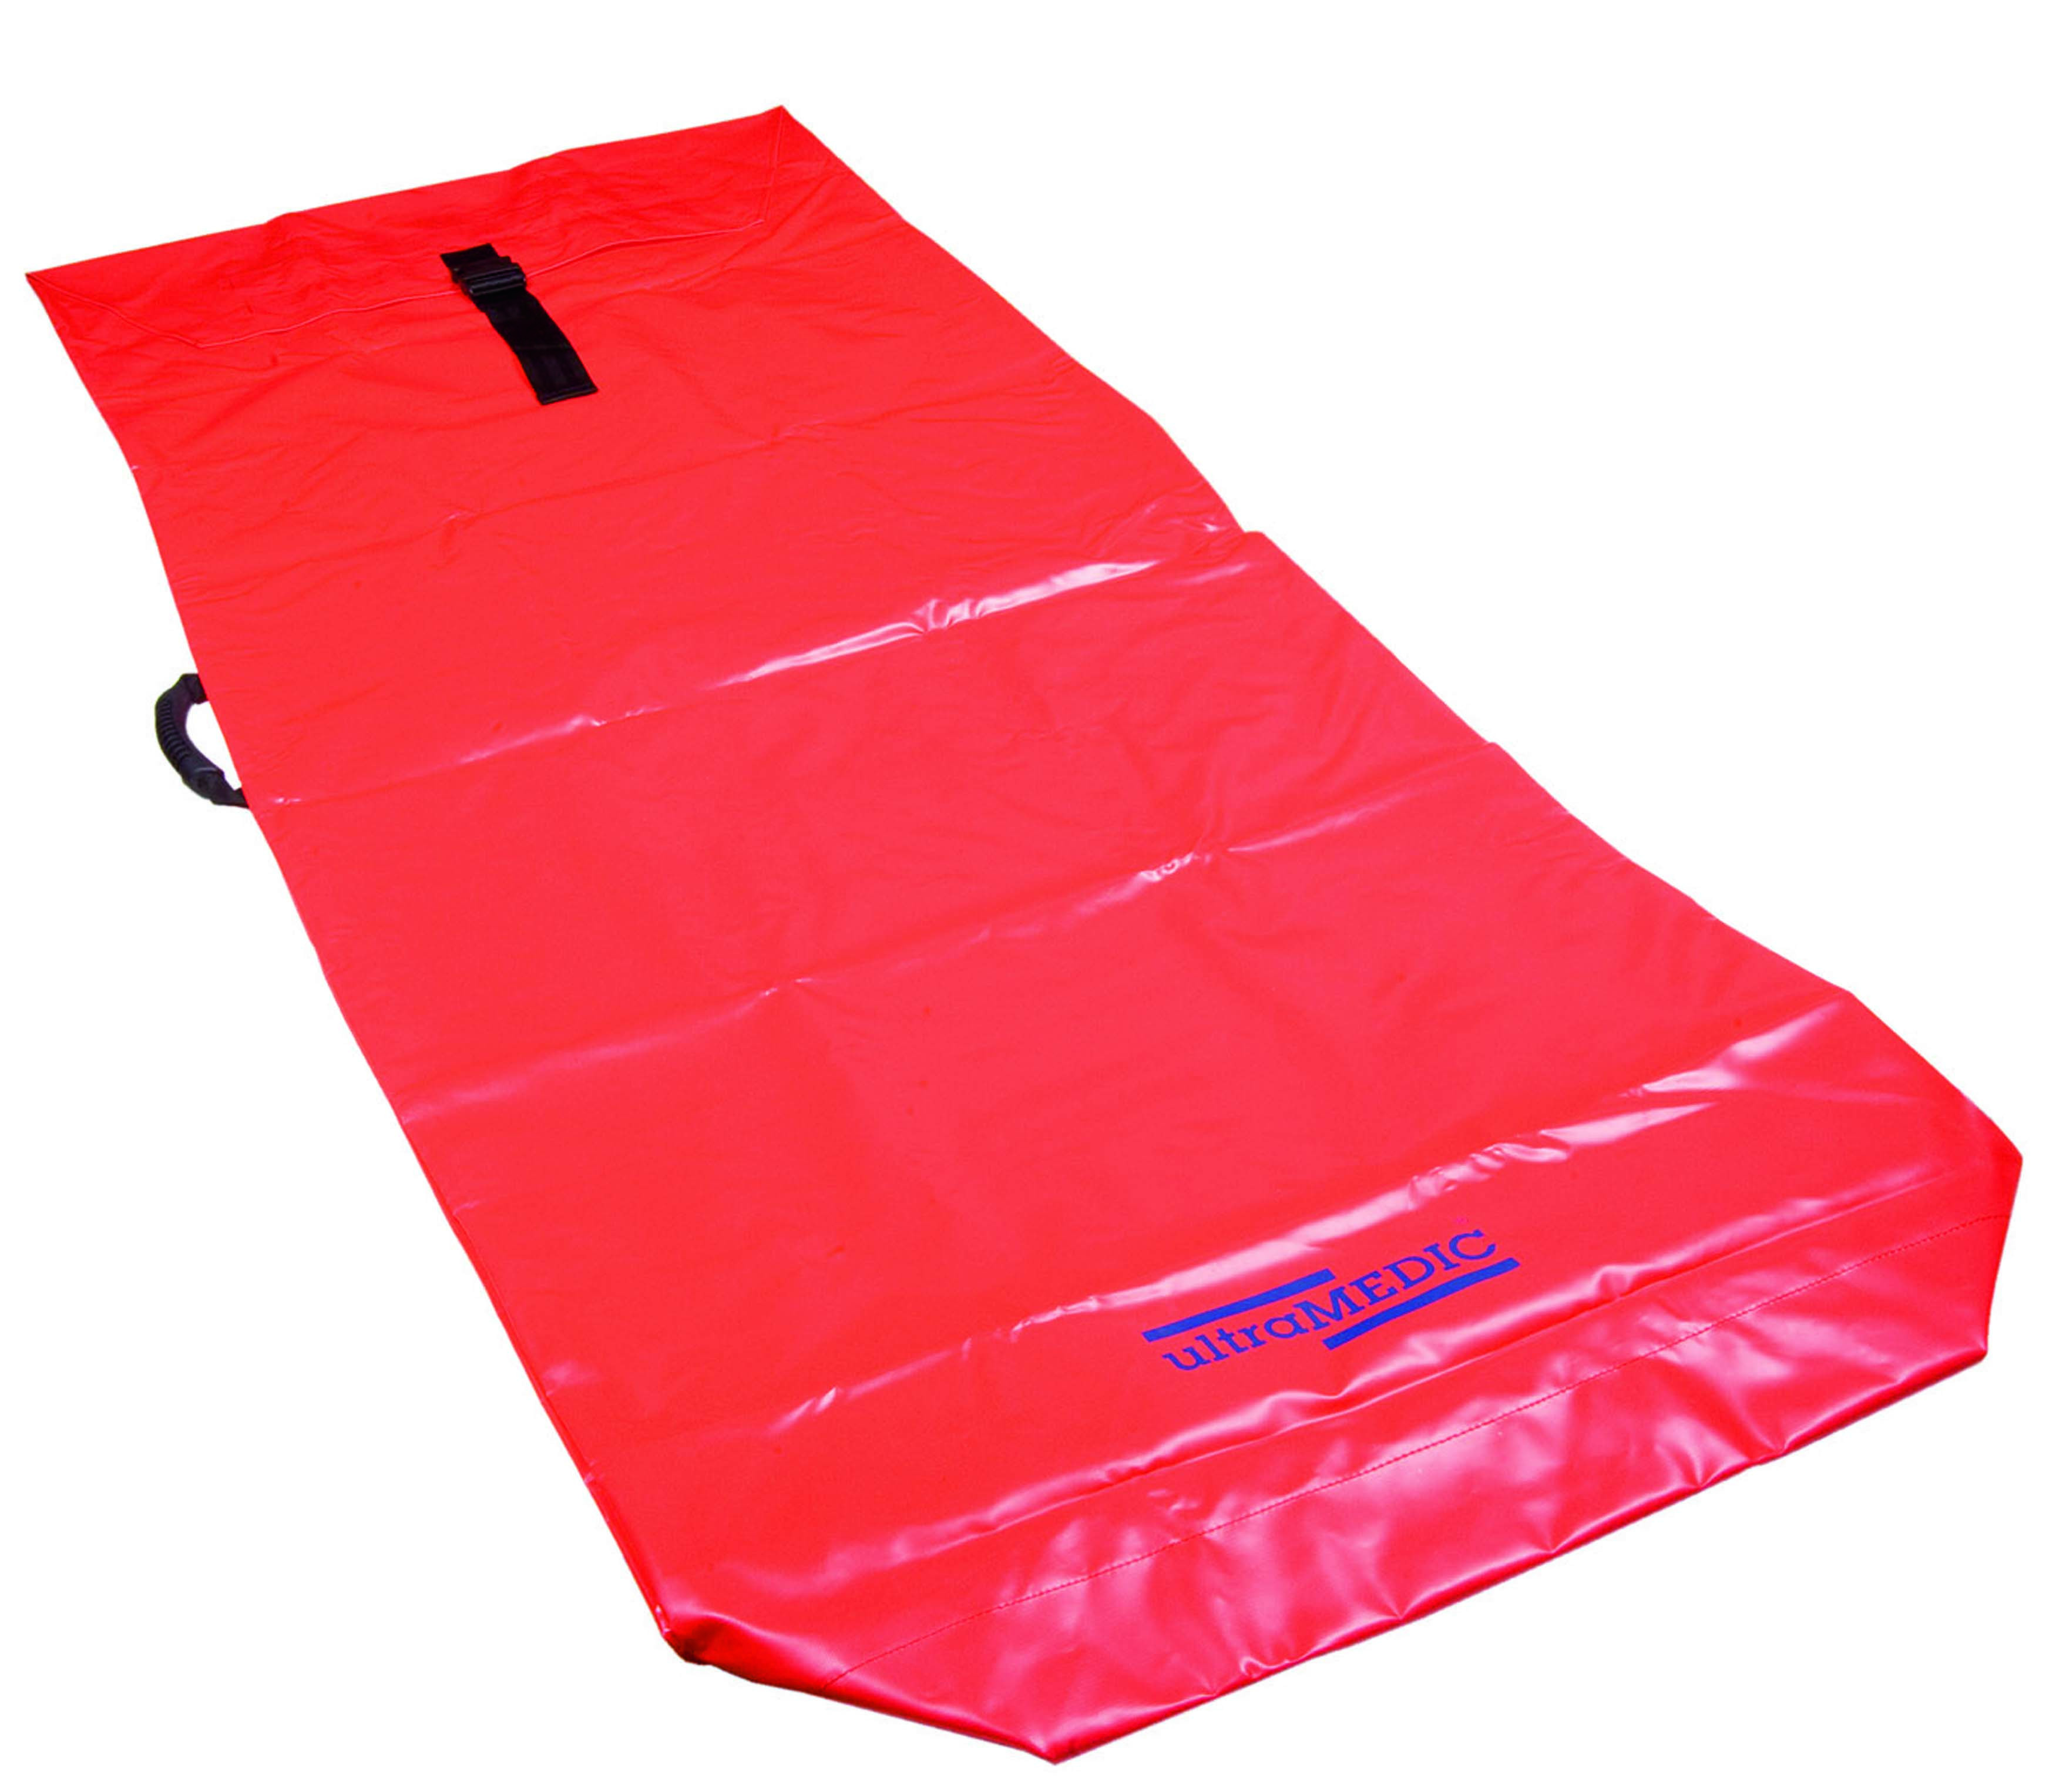 Carrying bag for one-piece basket stretcher